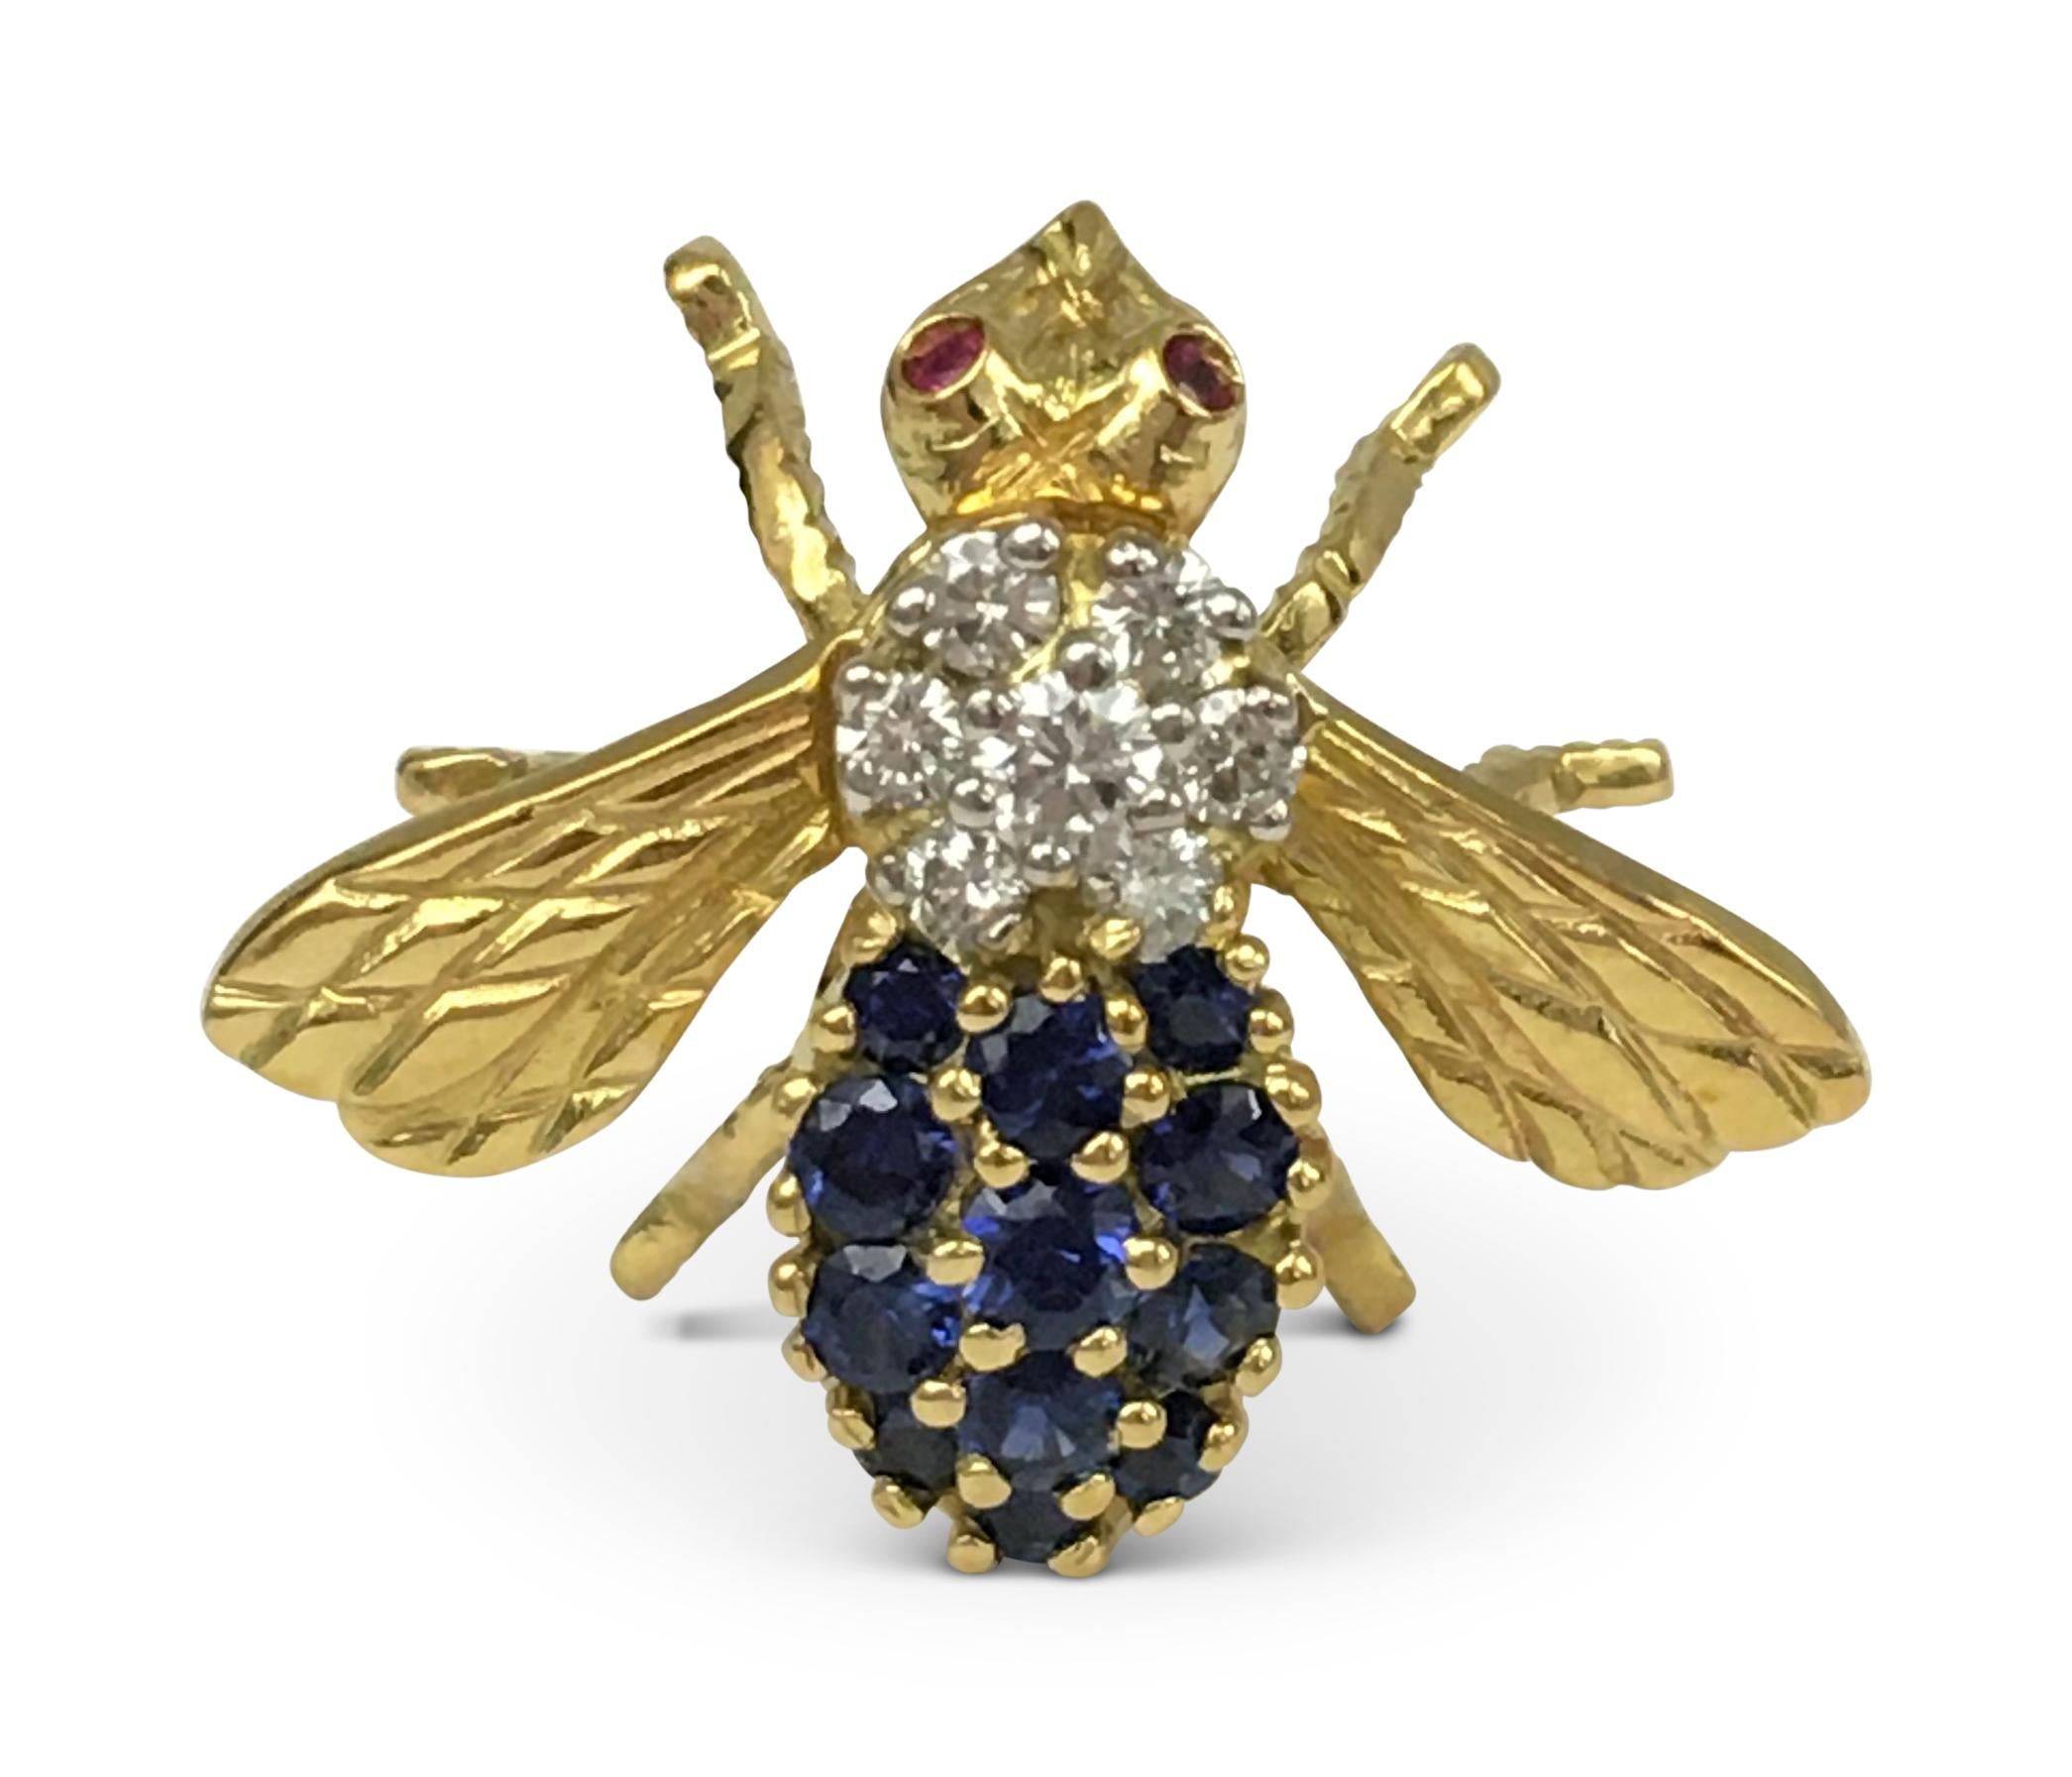 Whimsical bumble bee pin is set with high quality round brilliant cut diamonds (approx. 0.25 cttw, E-F color, VS clarity) and well matched blue sapphires (0.35 cttw) on the body. The bee is completed with ruby stone eyes. Measures 23mm x 27mm. The